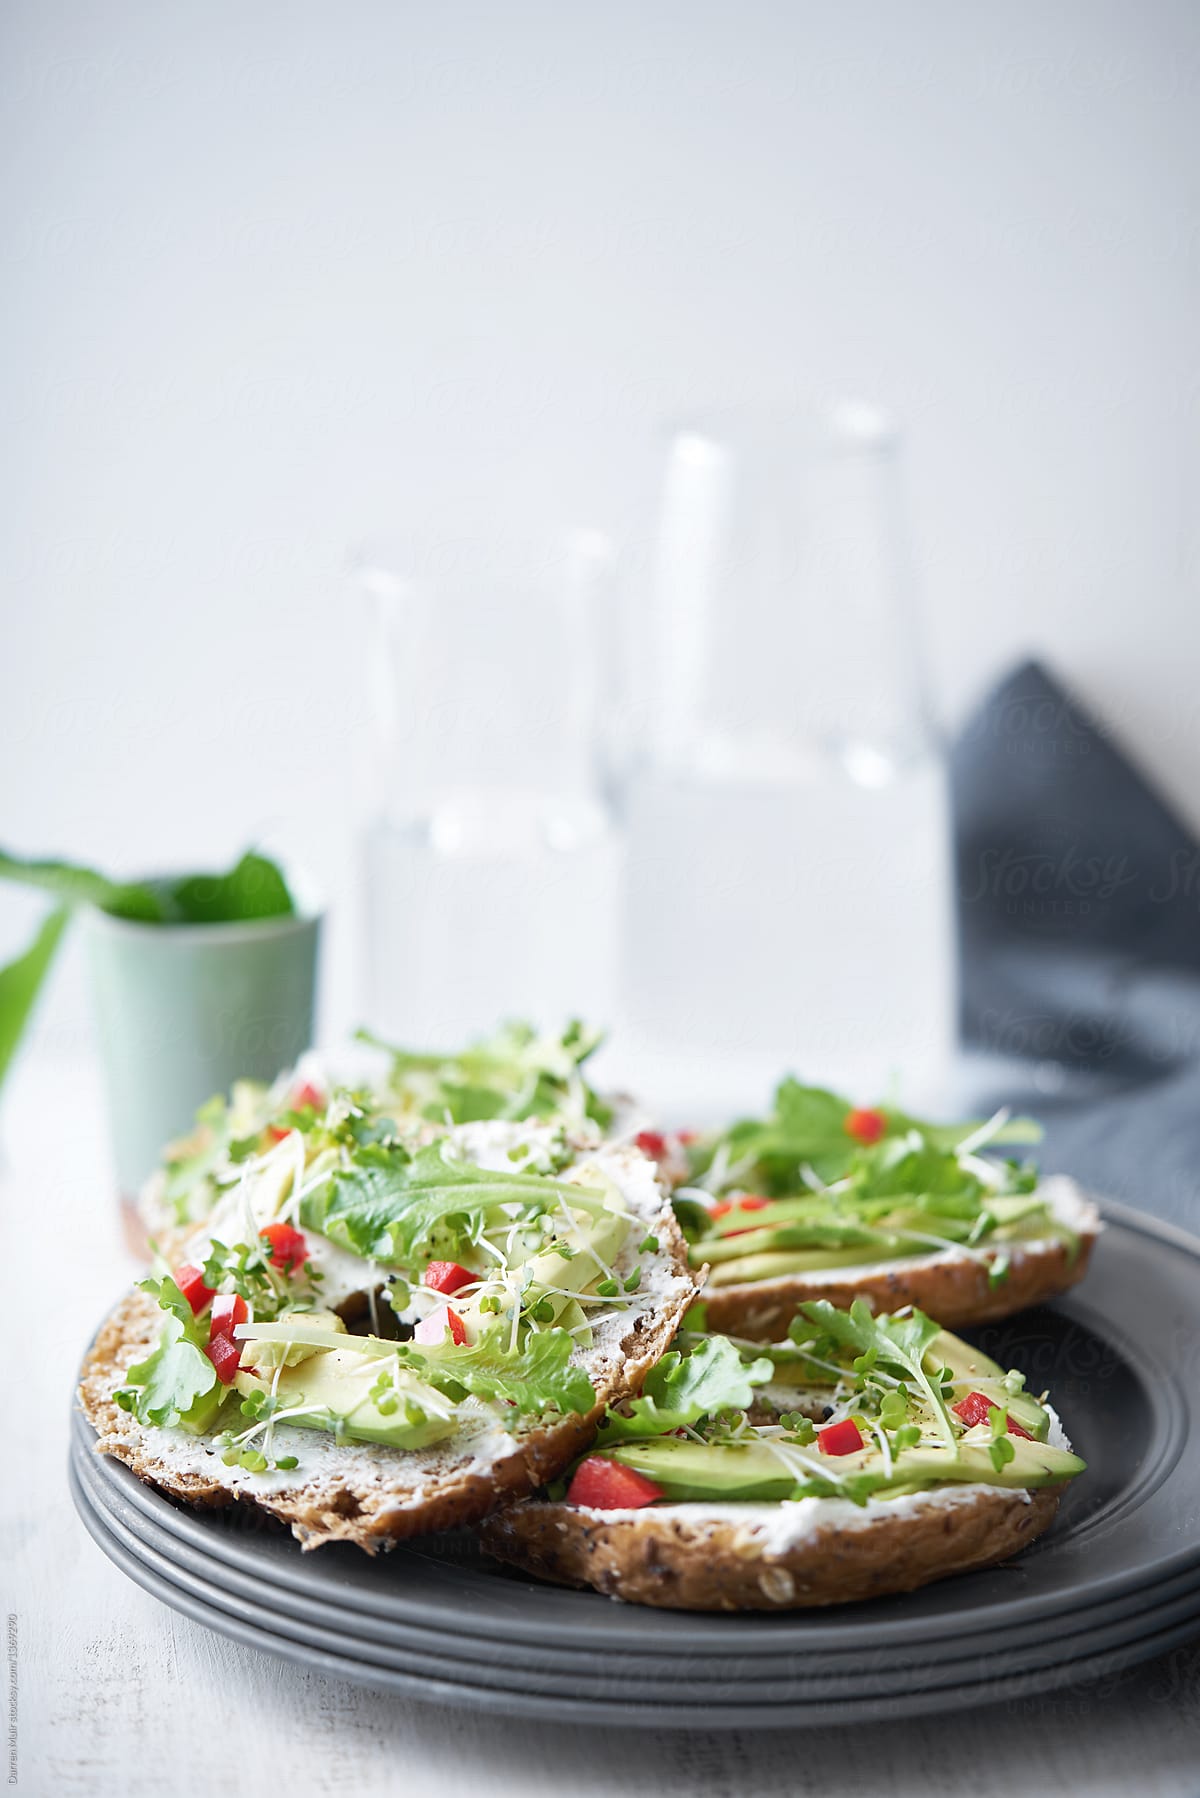 Wholemeal bagels with cream cheese and avocado salad.